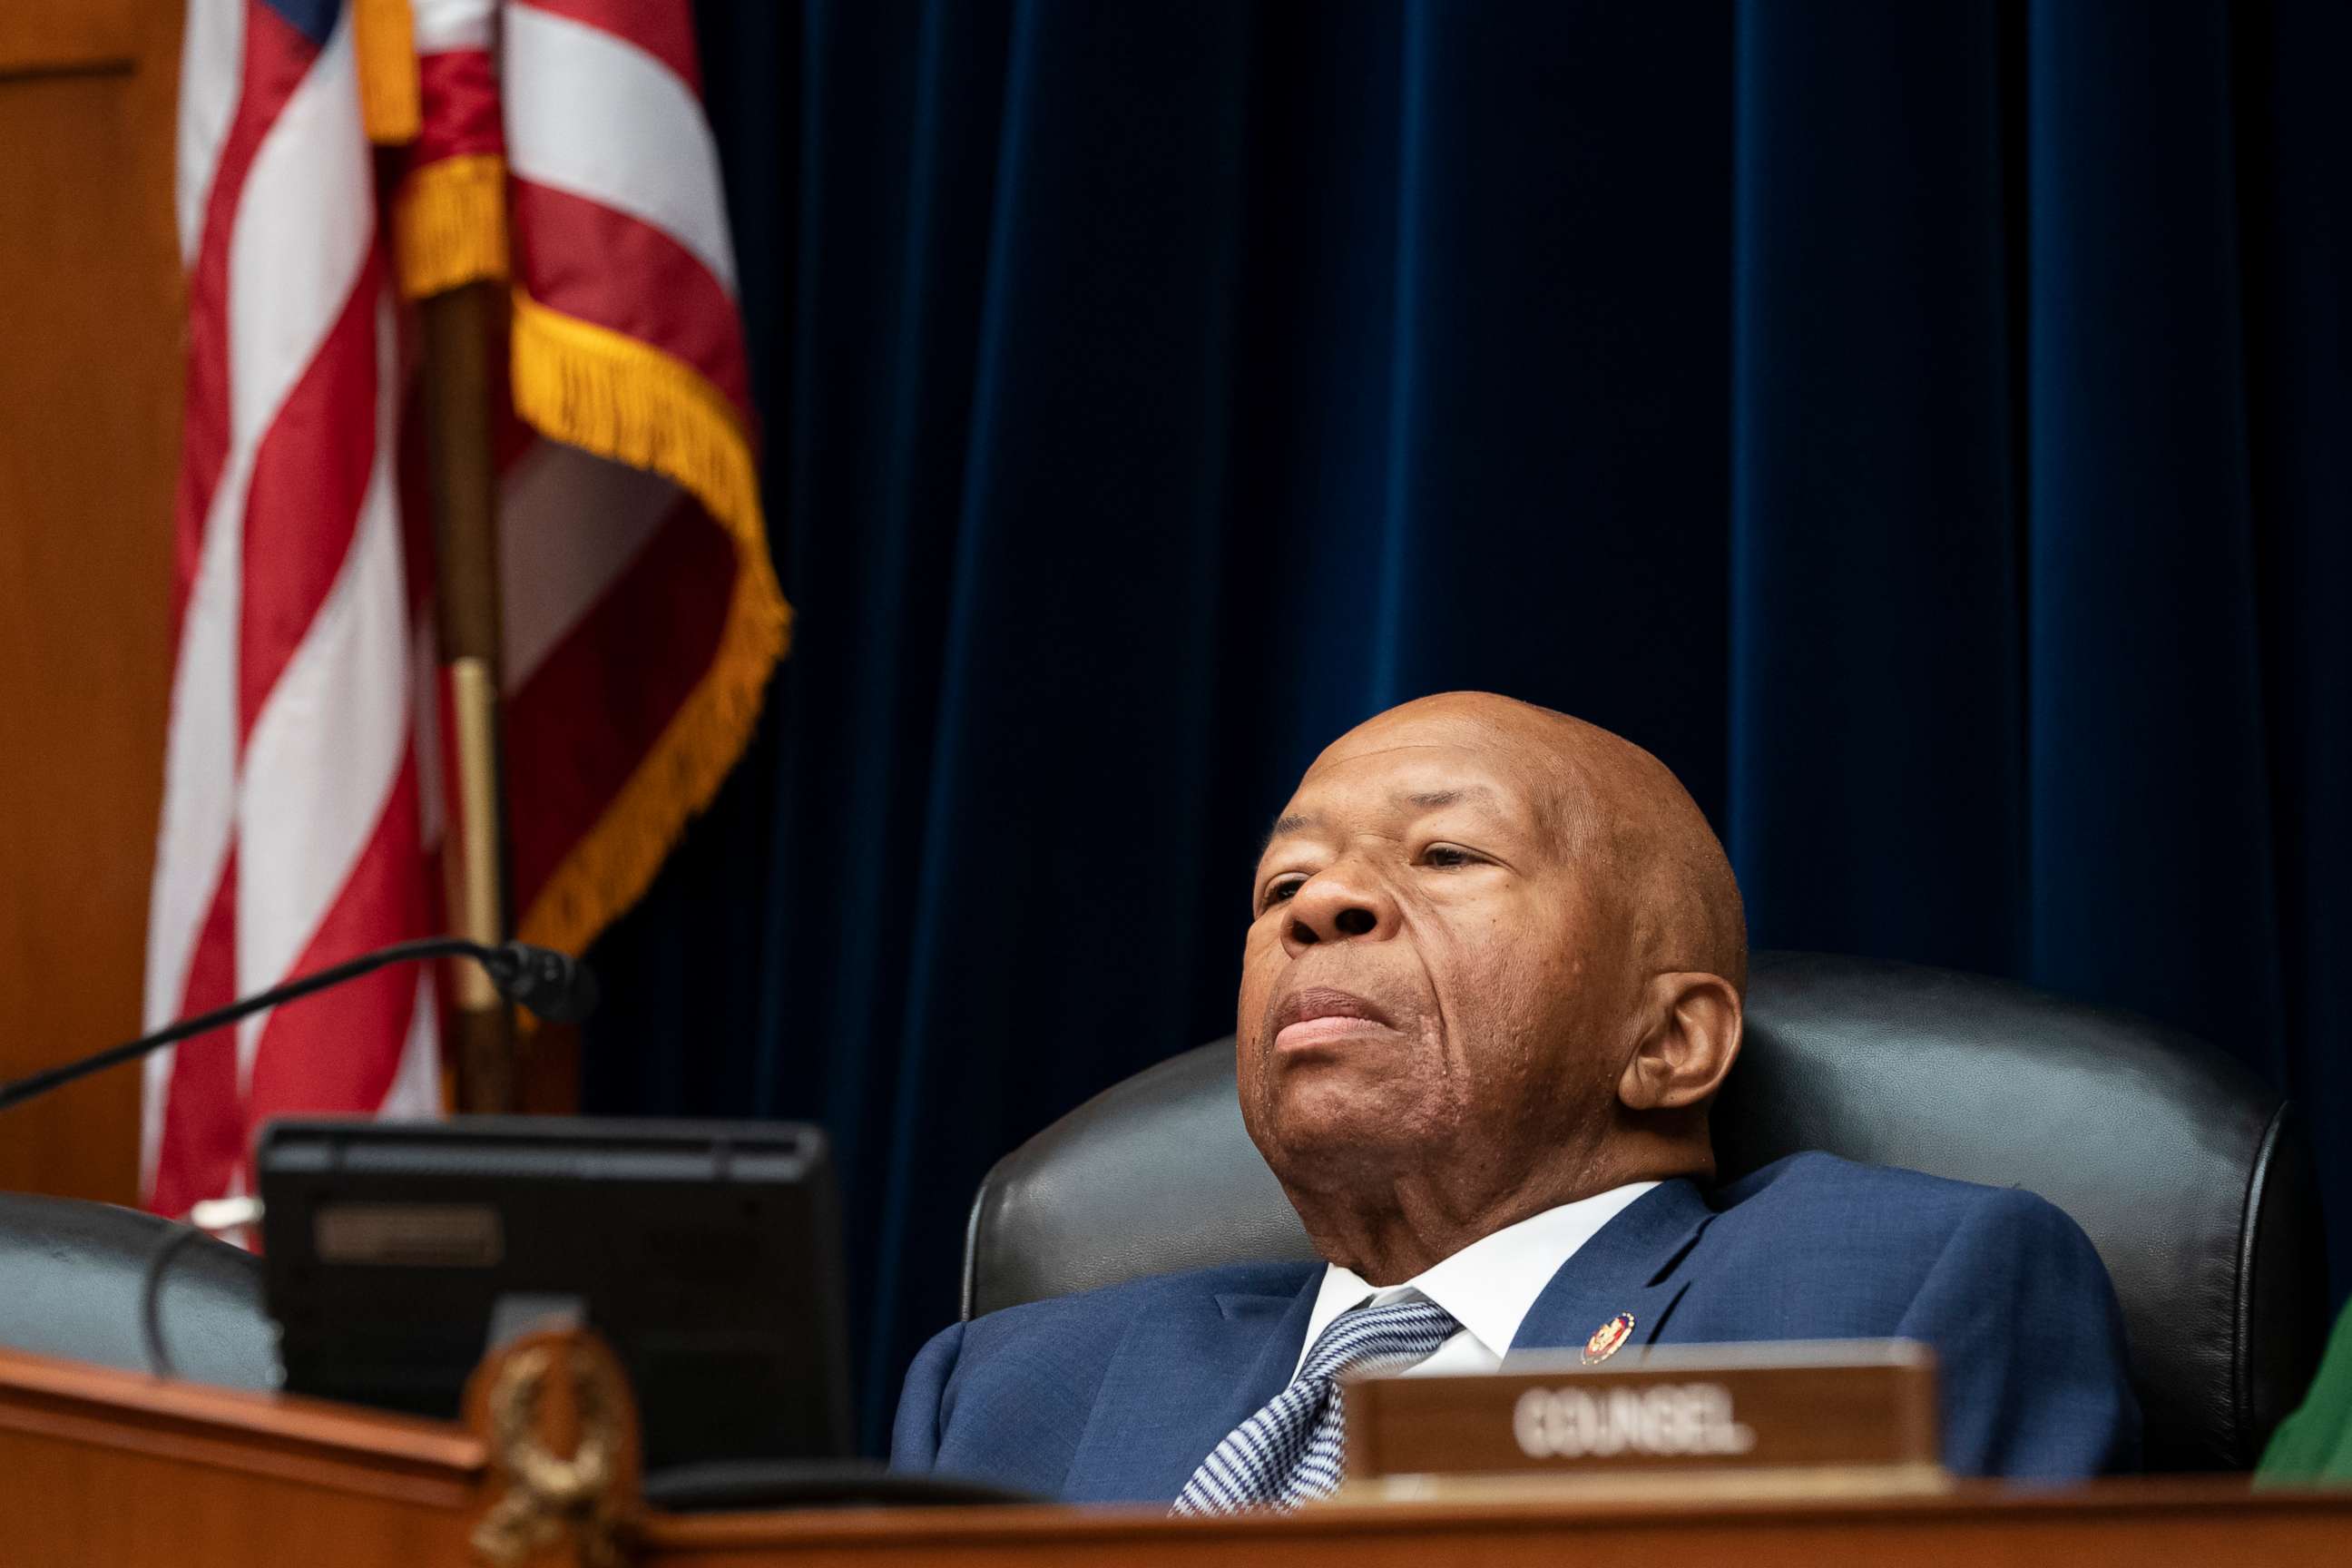 PHOTO: House Oversight and Reform Committee Chairman Elijah Cummings reclines just after the panel voted 24-15 to hold Attorney General William Barr and Commerce Secretary Wilbur Ross in contempt, on Capitol Hill in Washington, June 12, 2019.